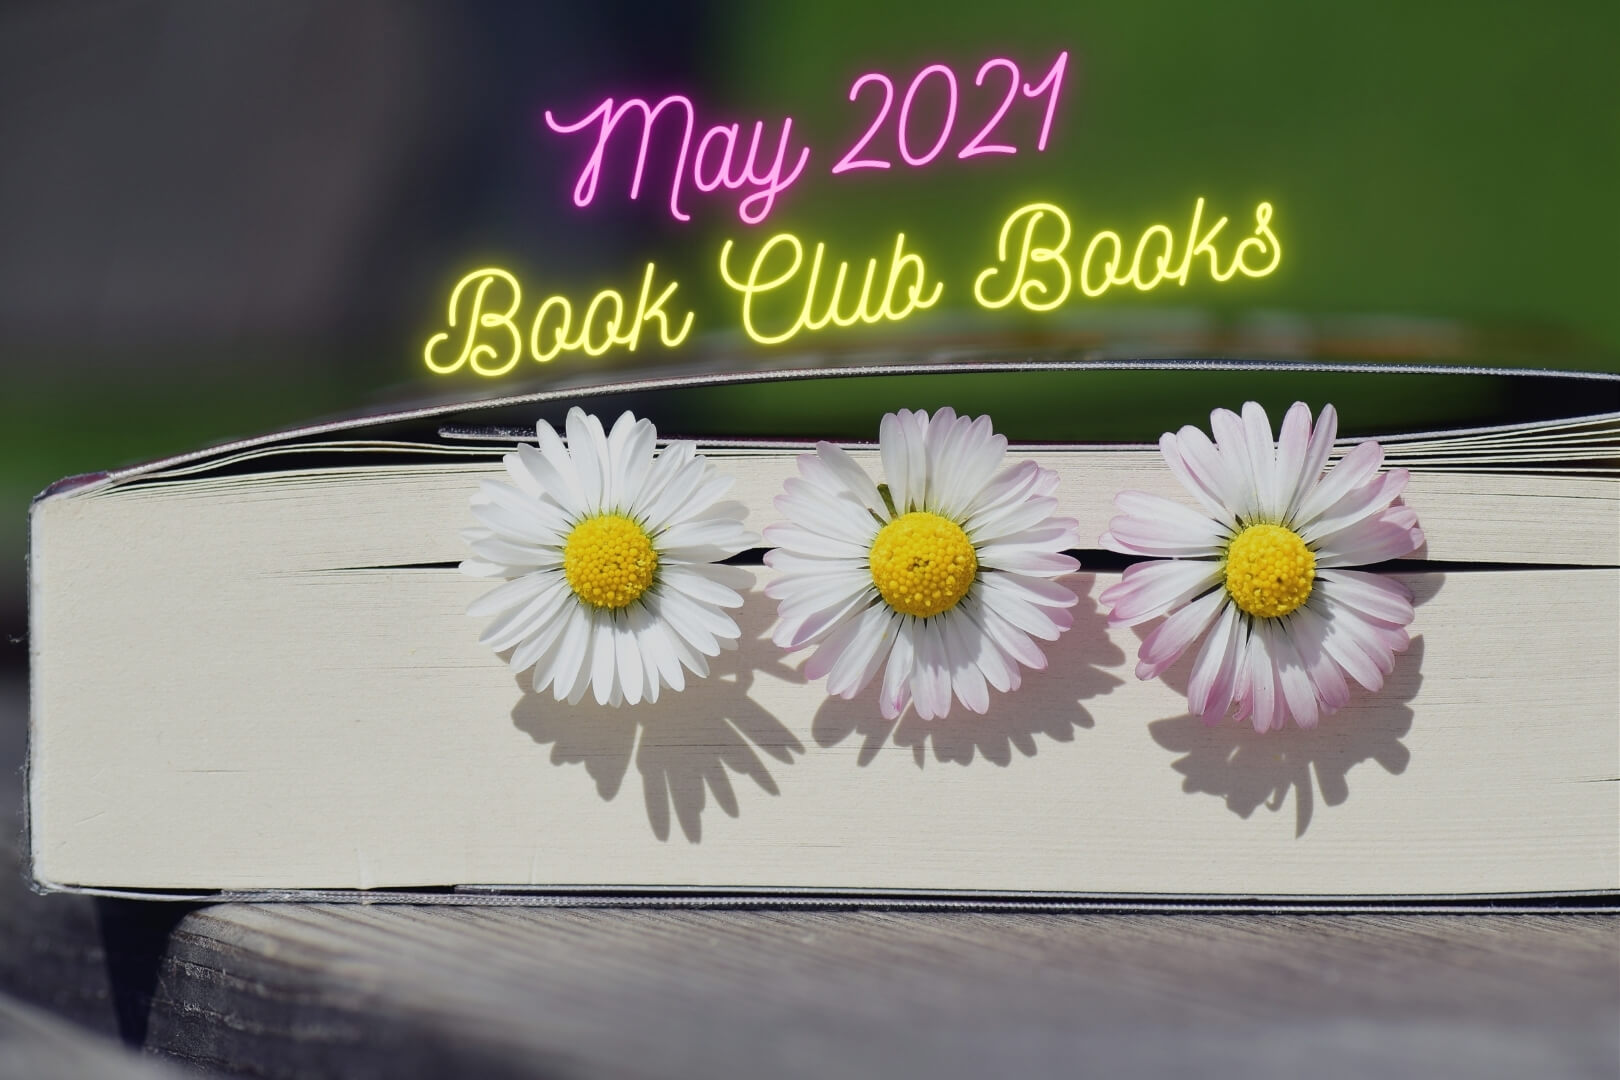 Book Club Picks for May 2021